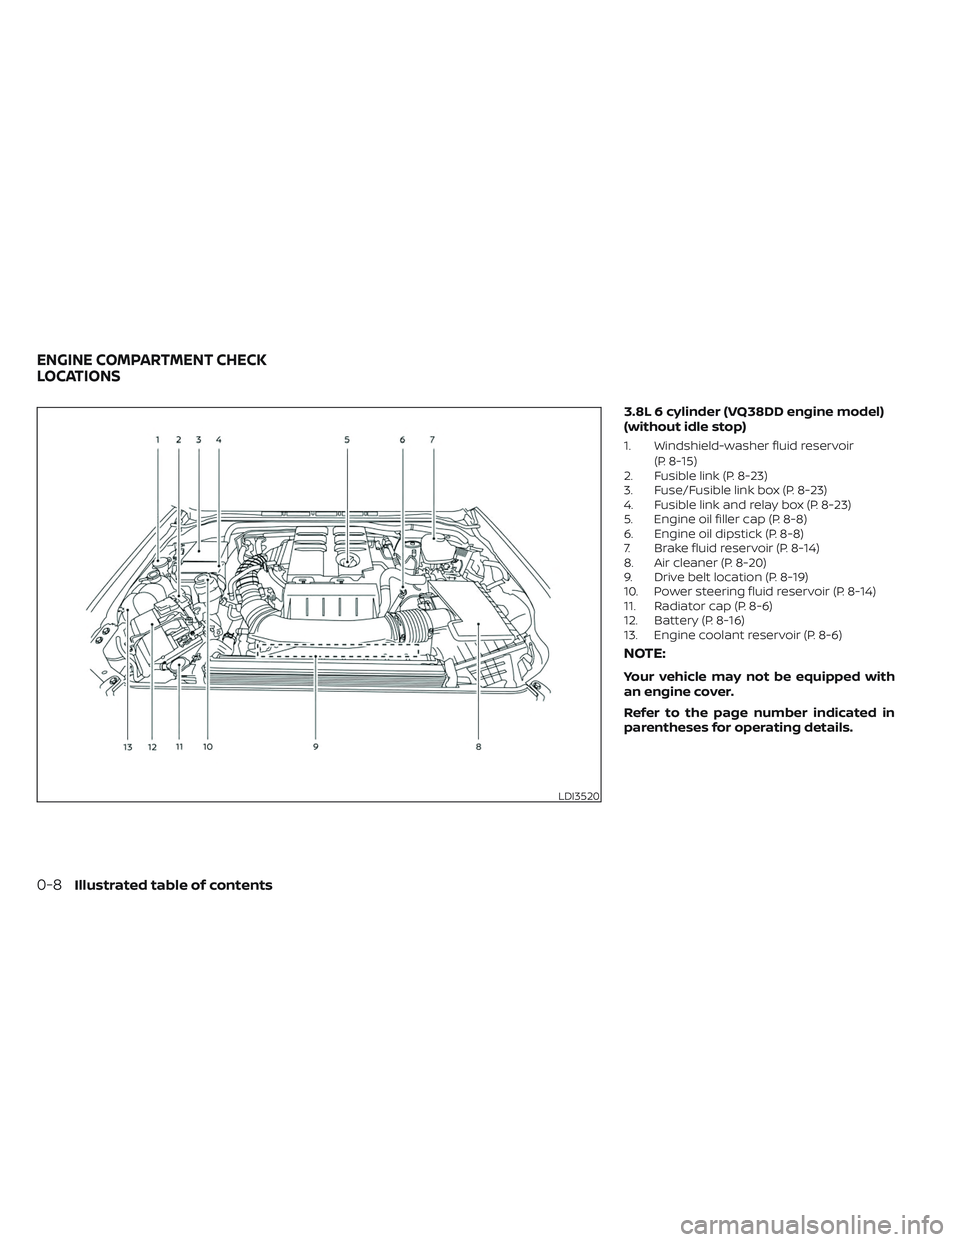 NISSAN FRONTIER 2023  Owners Manual 3.8L 6 cylinder (VQ38DD engine model)
(without idle stop)
1. Windshield-washer fluid reservoir(P. 8-15)
2. Fusible link (P. 8-23)
3. Fuse/Fusible link box (P. 8-23)
4. Fusible link and relay box (P. 8